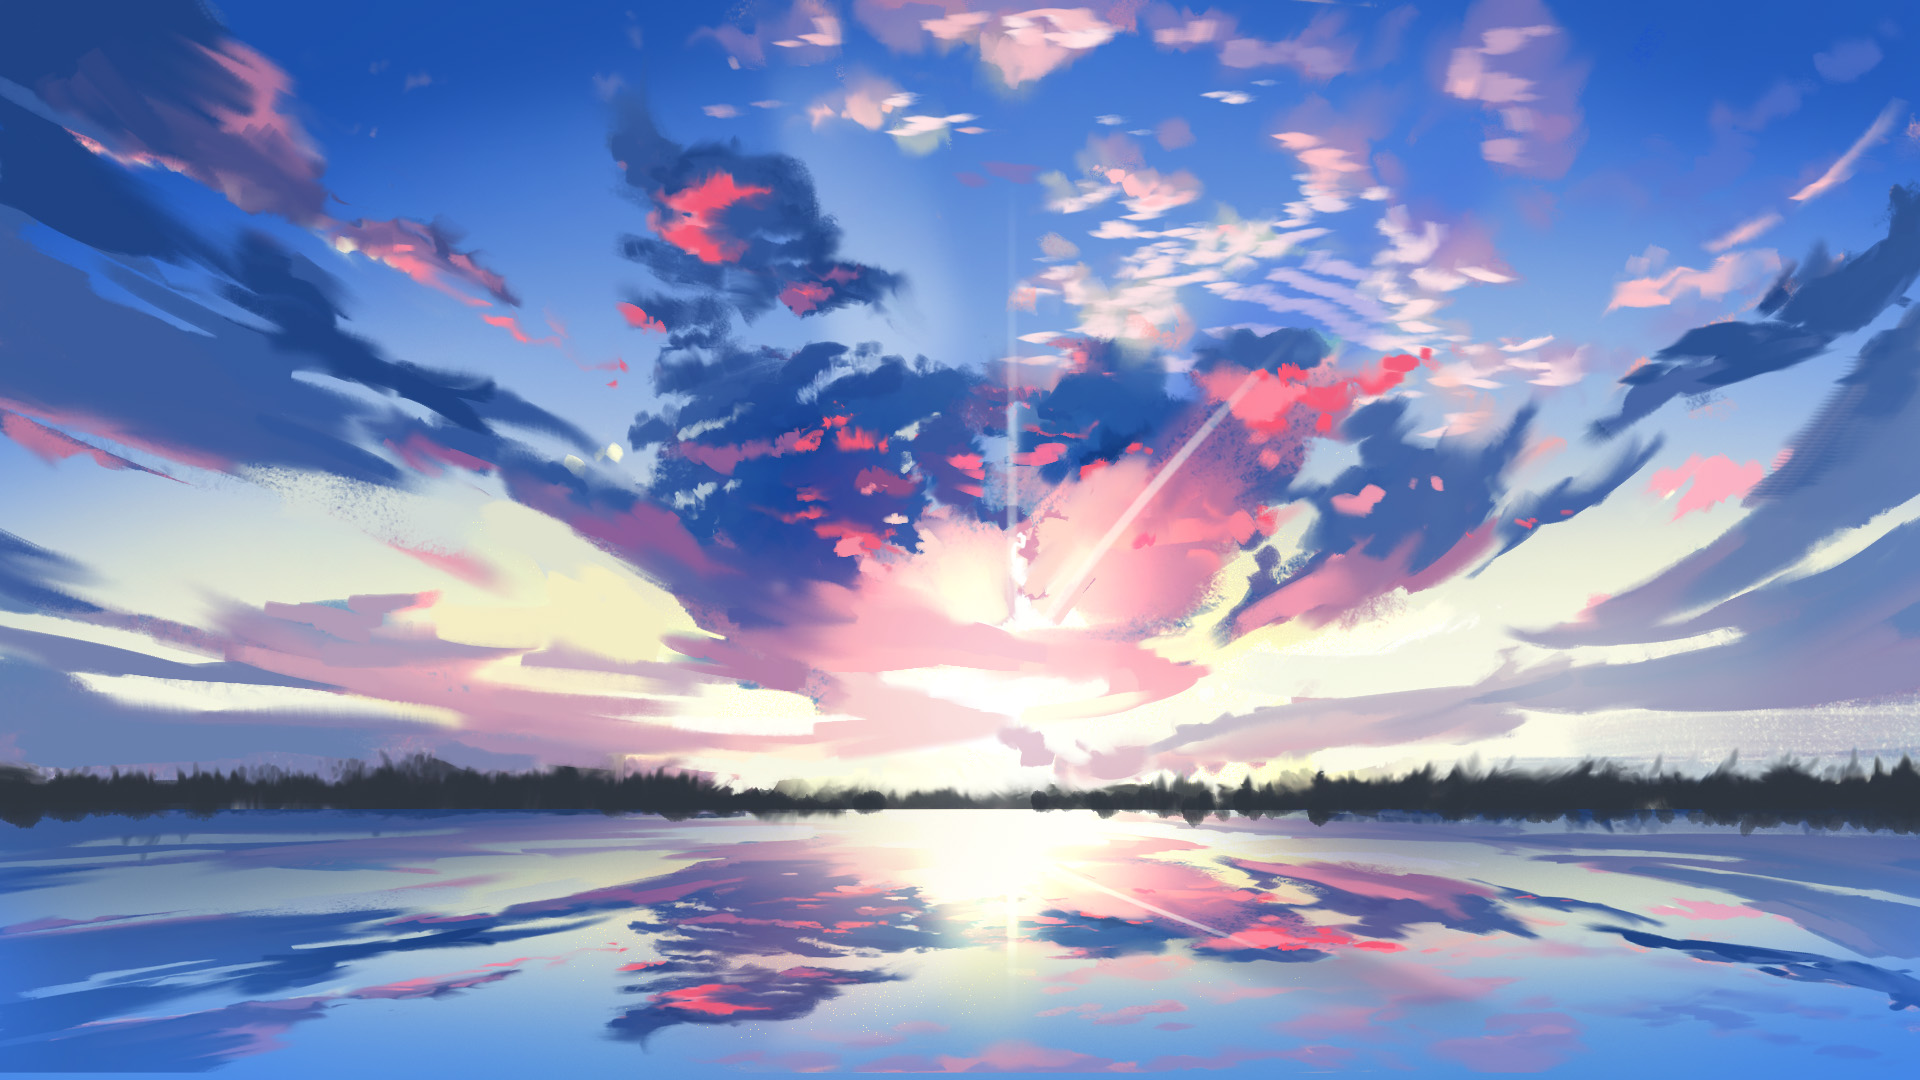 General 1920x1080 sky clouds reflection lake blue sunlight